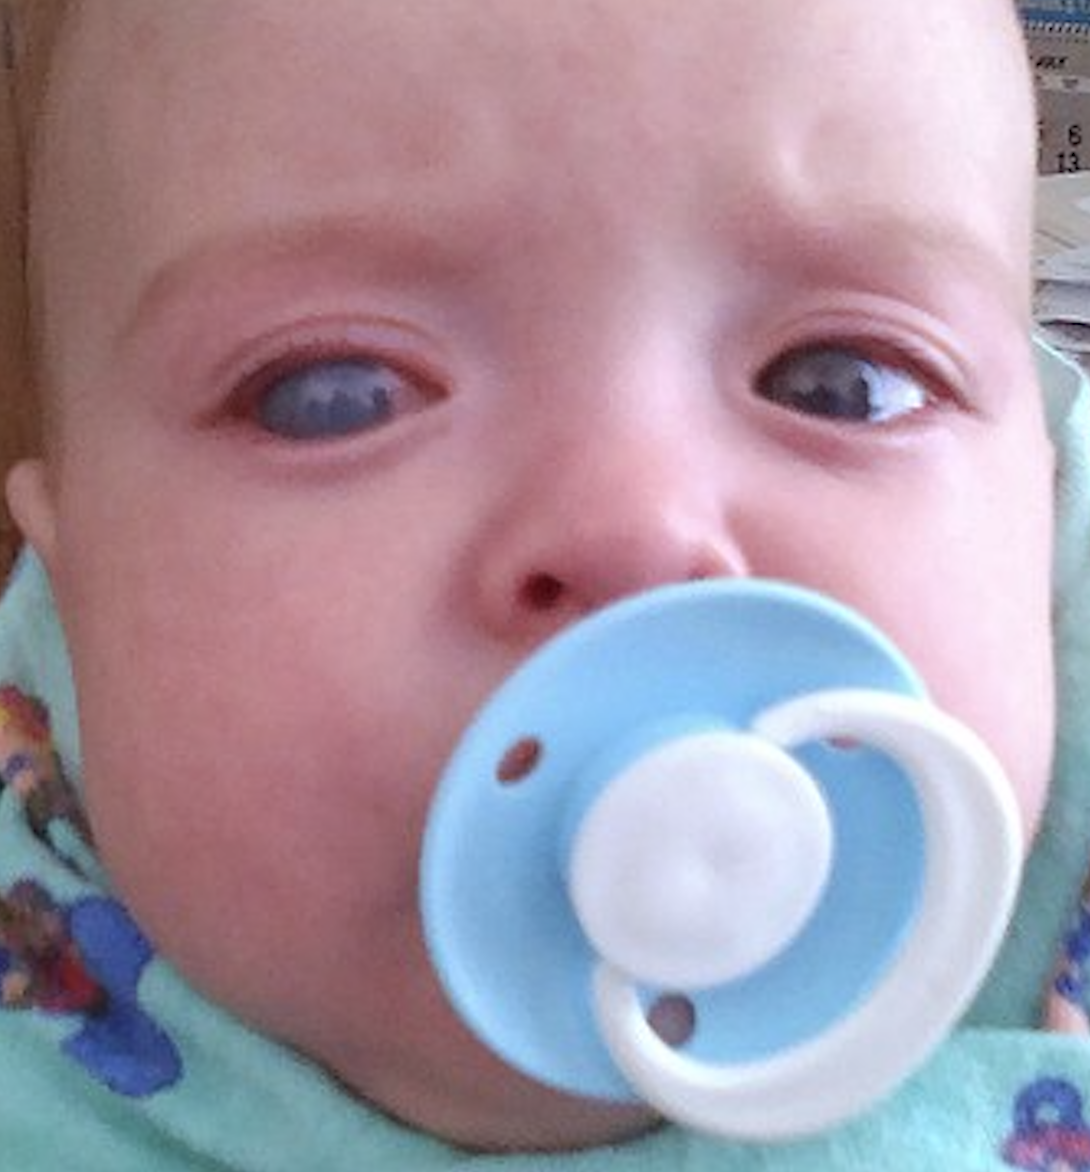 Example of buphthalmos of the right eye in an infant.